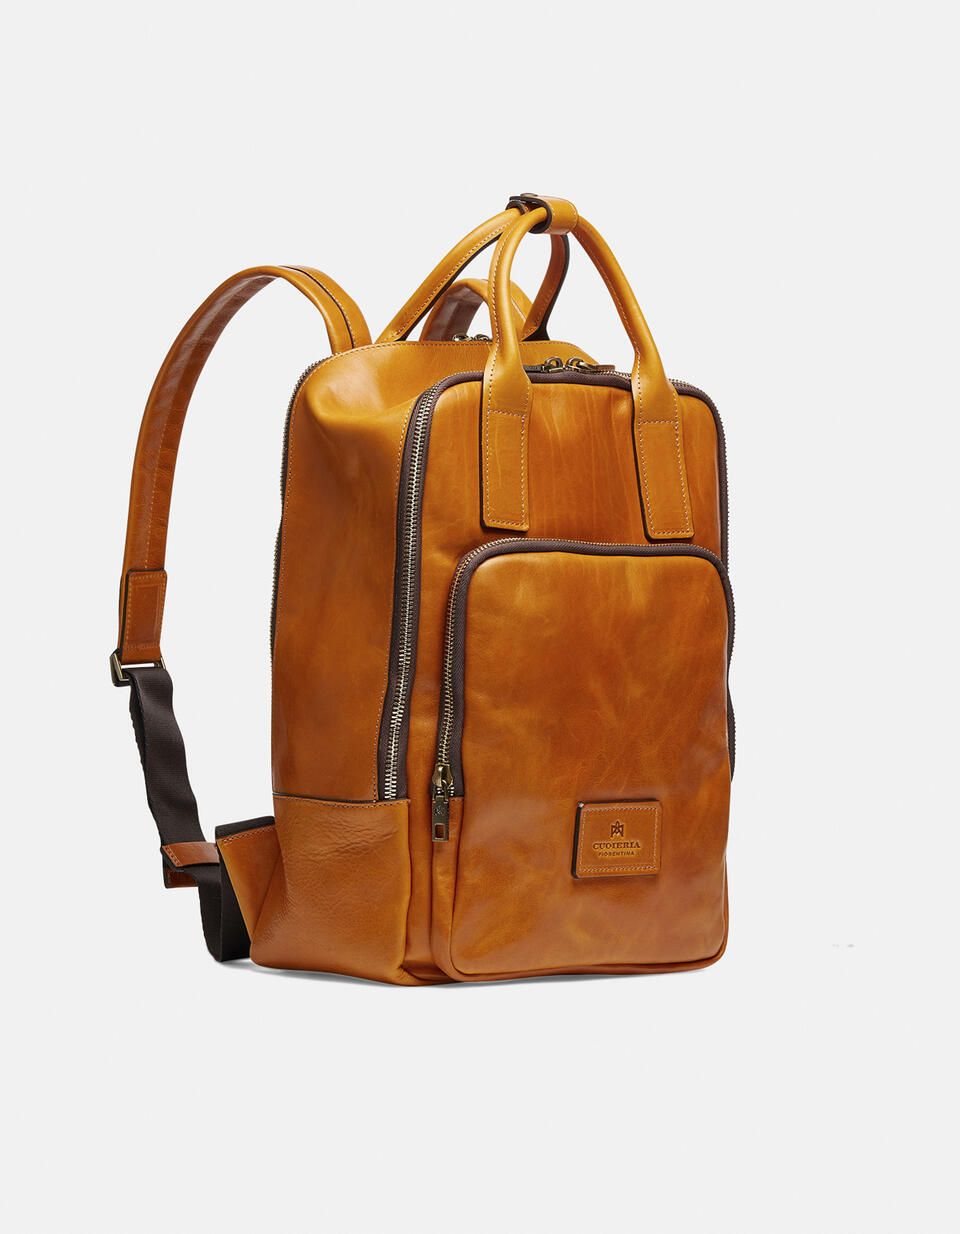 Tokio large backpack in soft leather - Backpacks - MEN'S BAGS | bags  - Backpacks - MEN'S BAGS | bagsCuoieria Fiorentina